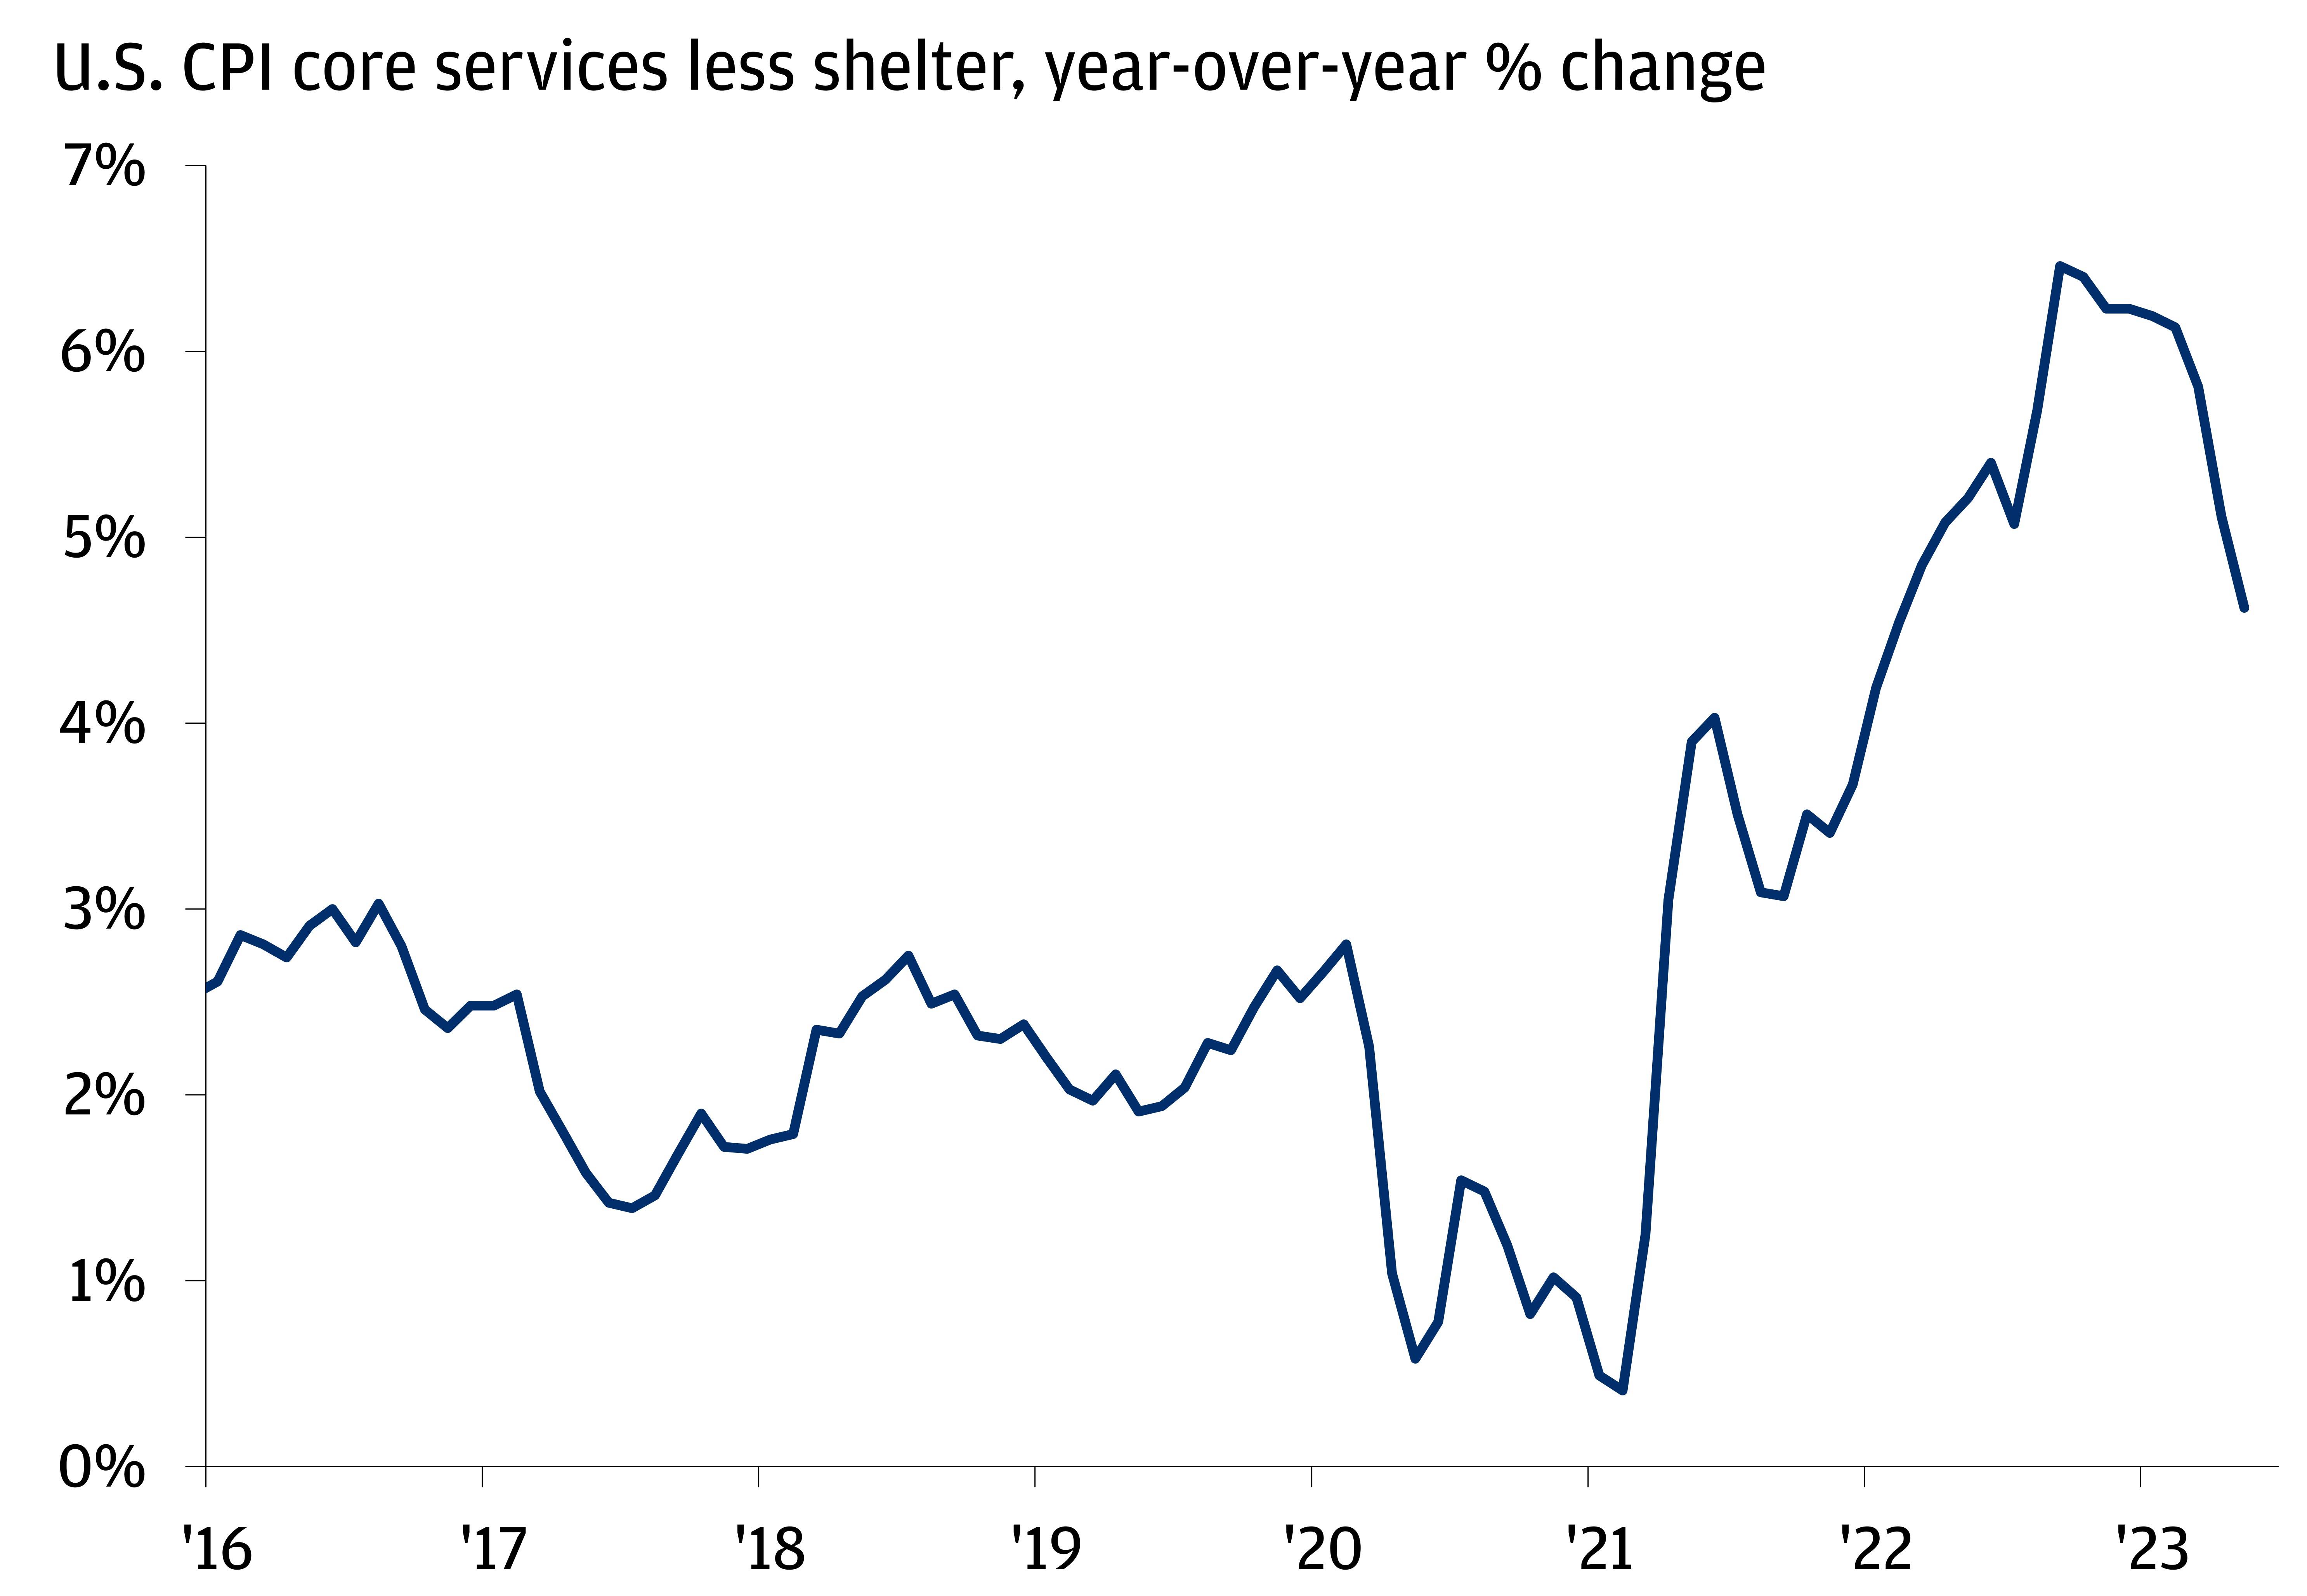 This line chart shows the year-over-year change in the U.S. CPI Core Services Less Shelter Index from January 2016 to May 2023.